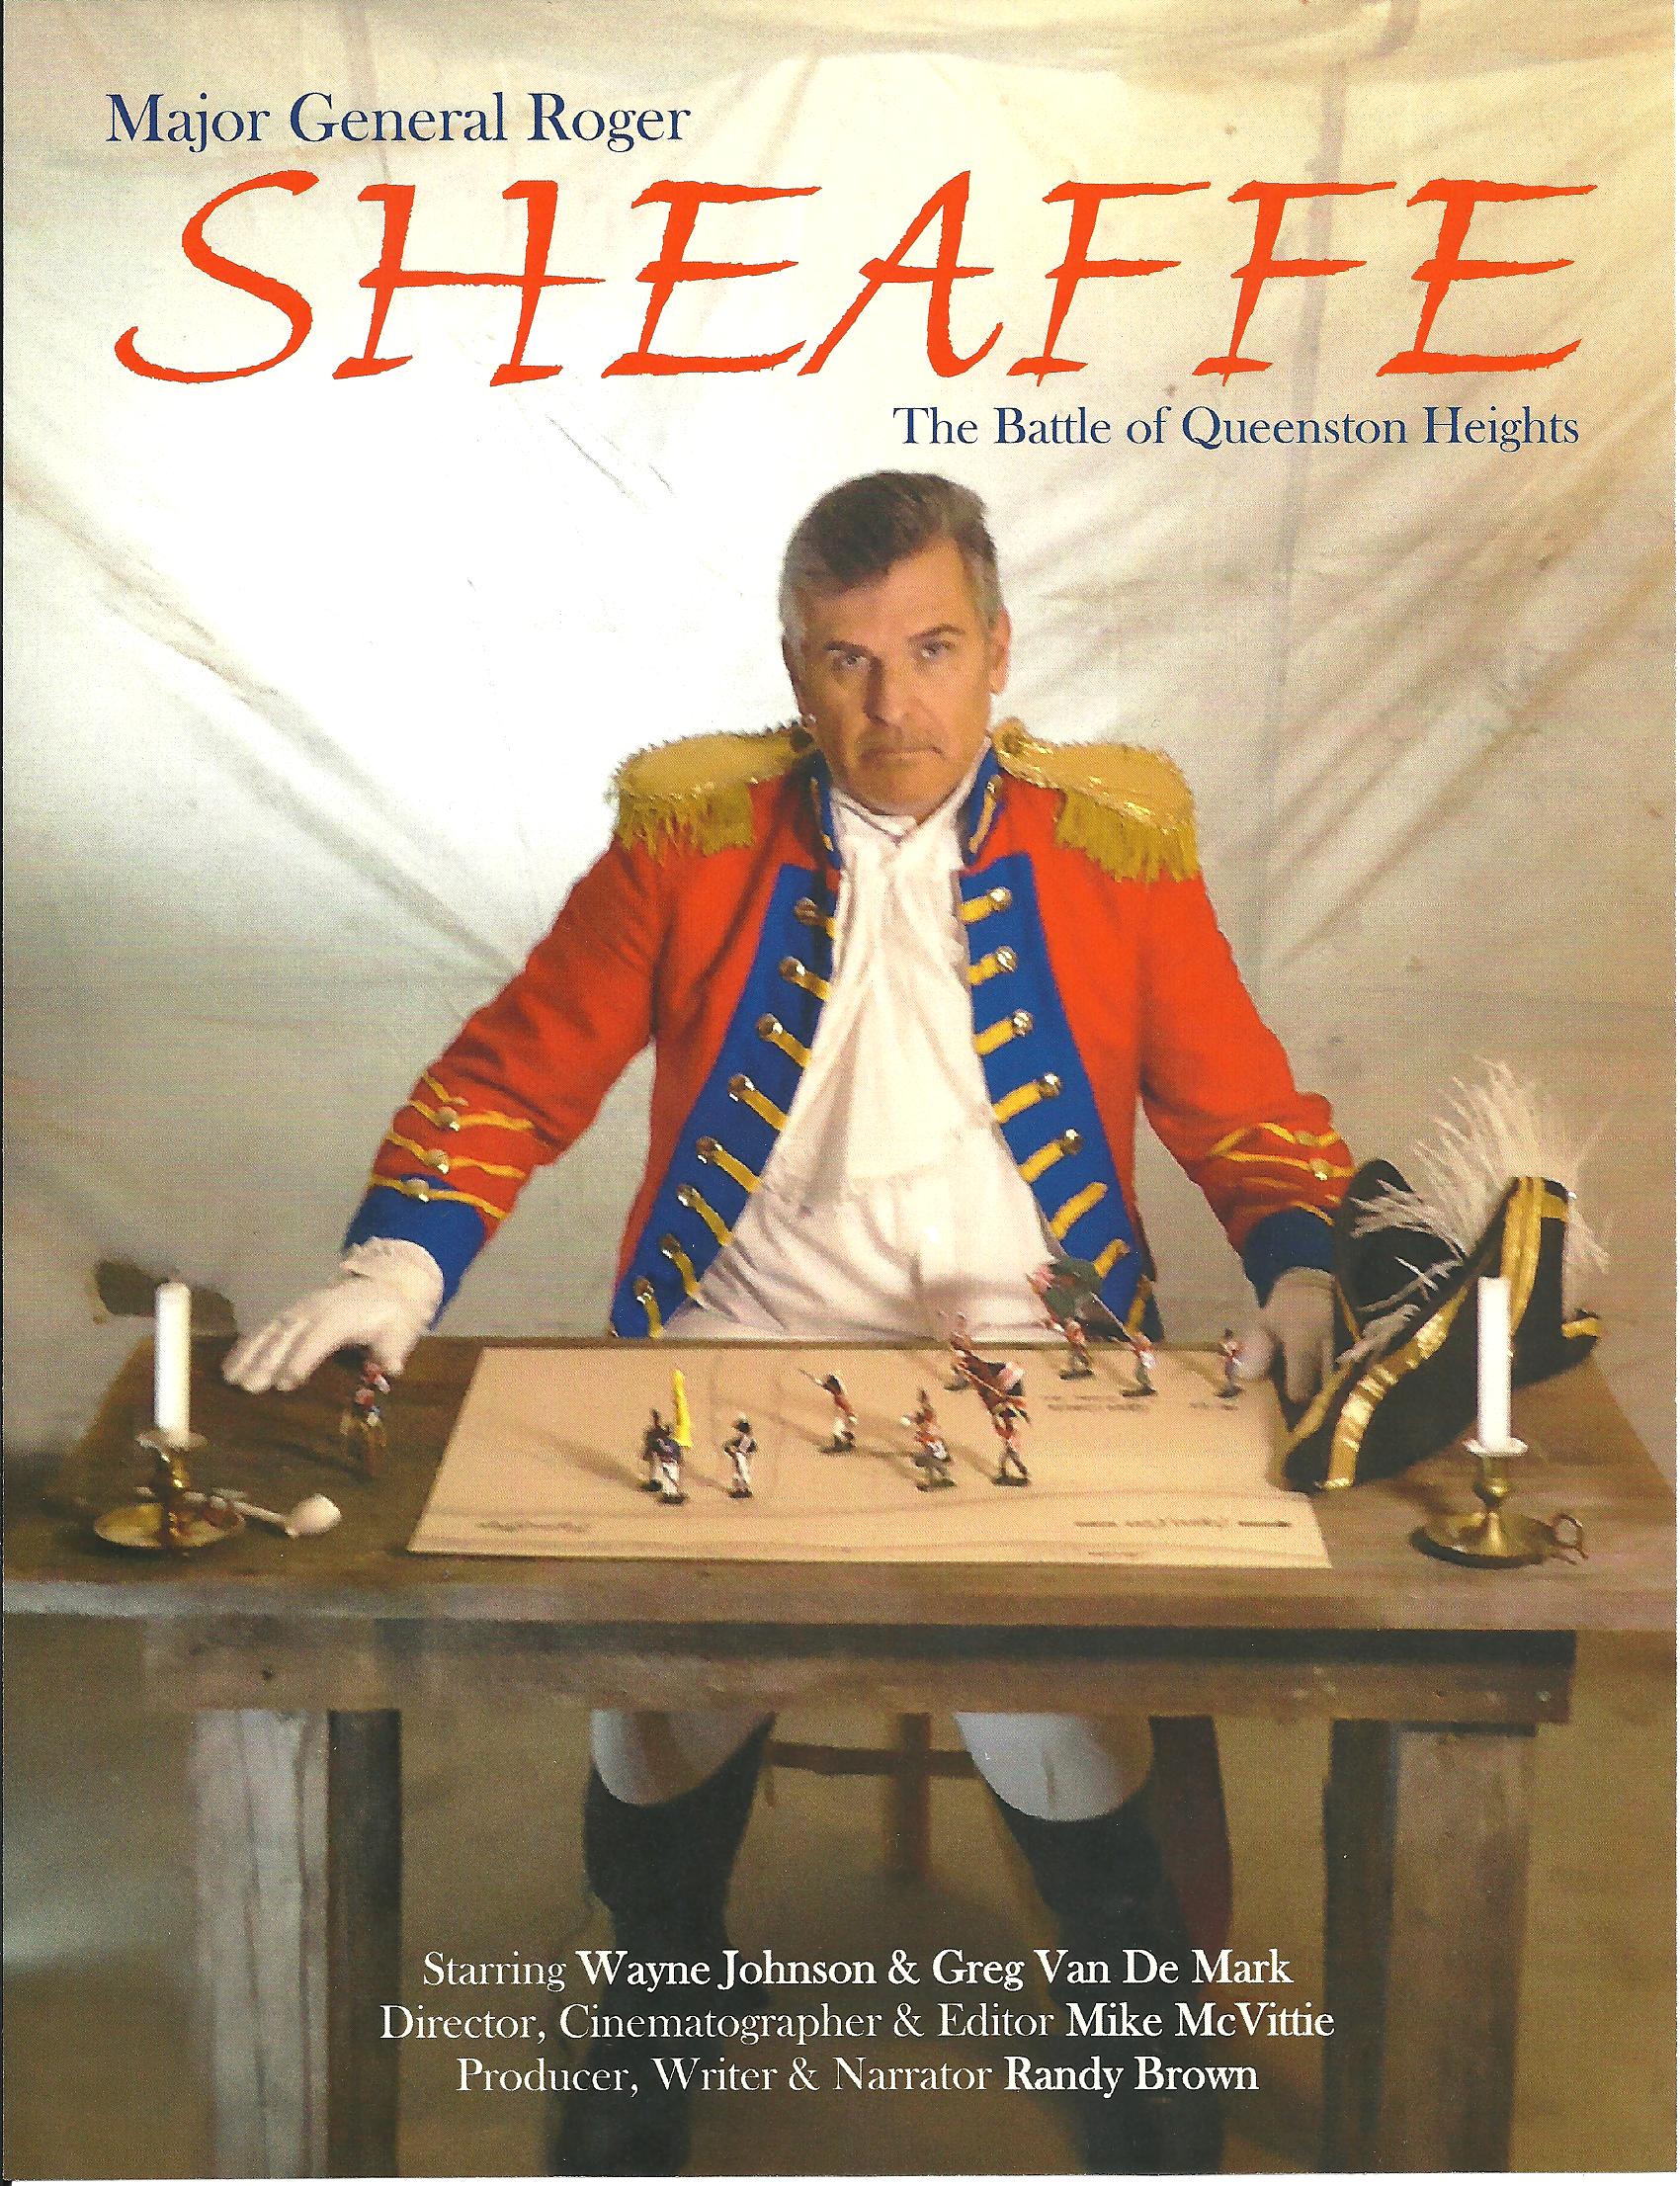 Sheafffe- Produced, Writen & Narrated by Randy Brown